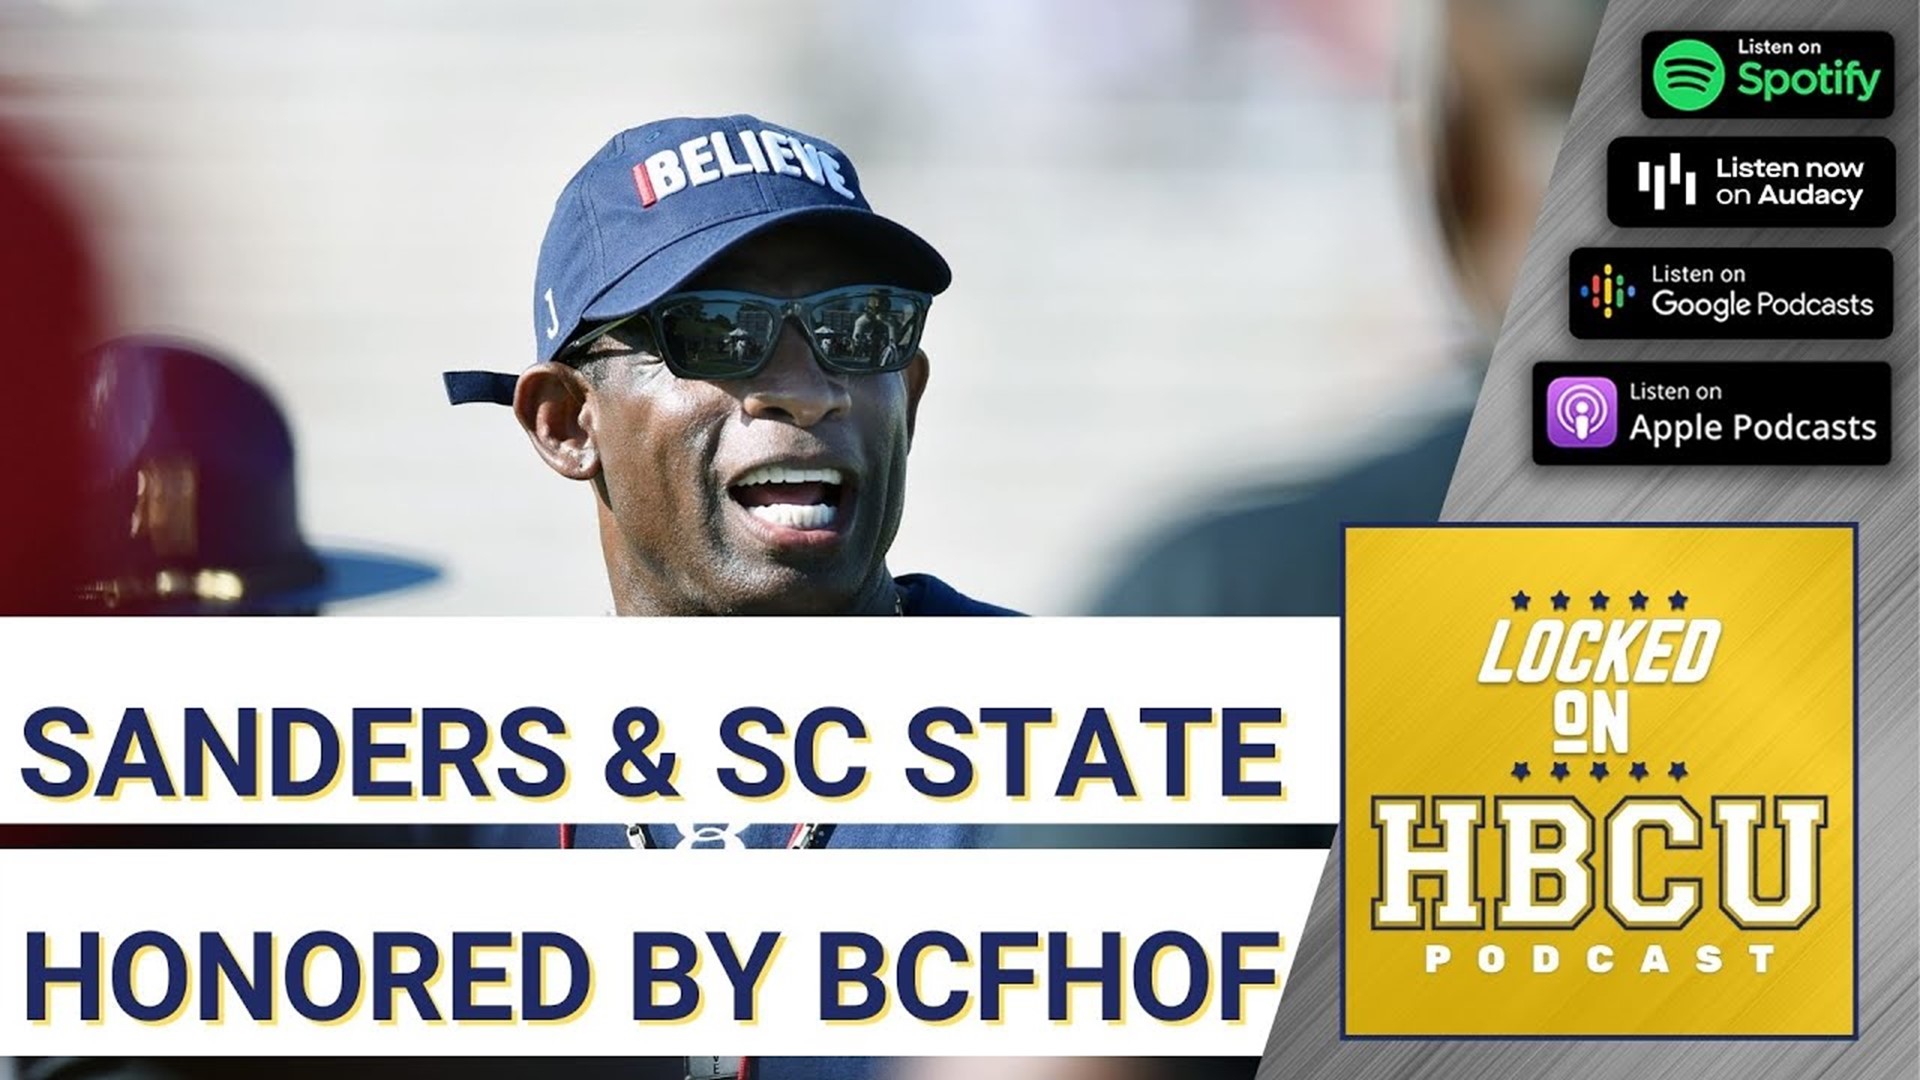 The Black College football Hall of Fame highlighted the current crop of HBCU football as well such as Deion Sanders, South Carolina State football, and more.